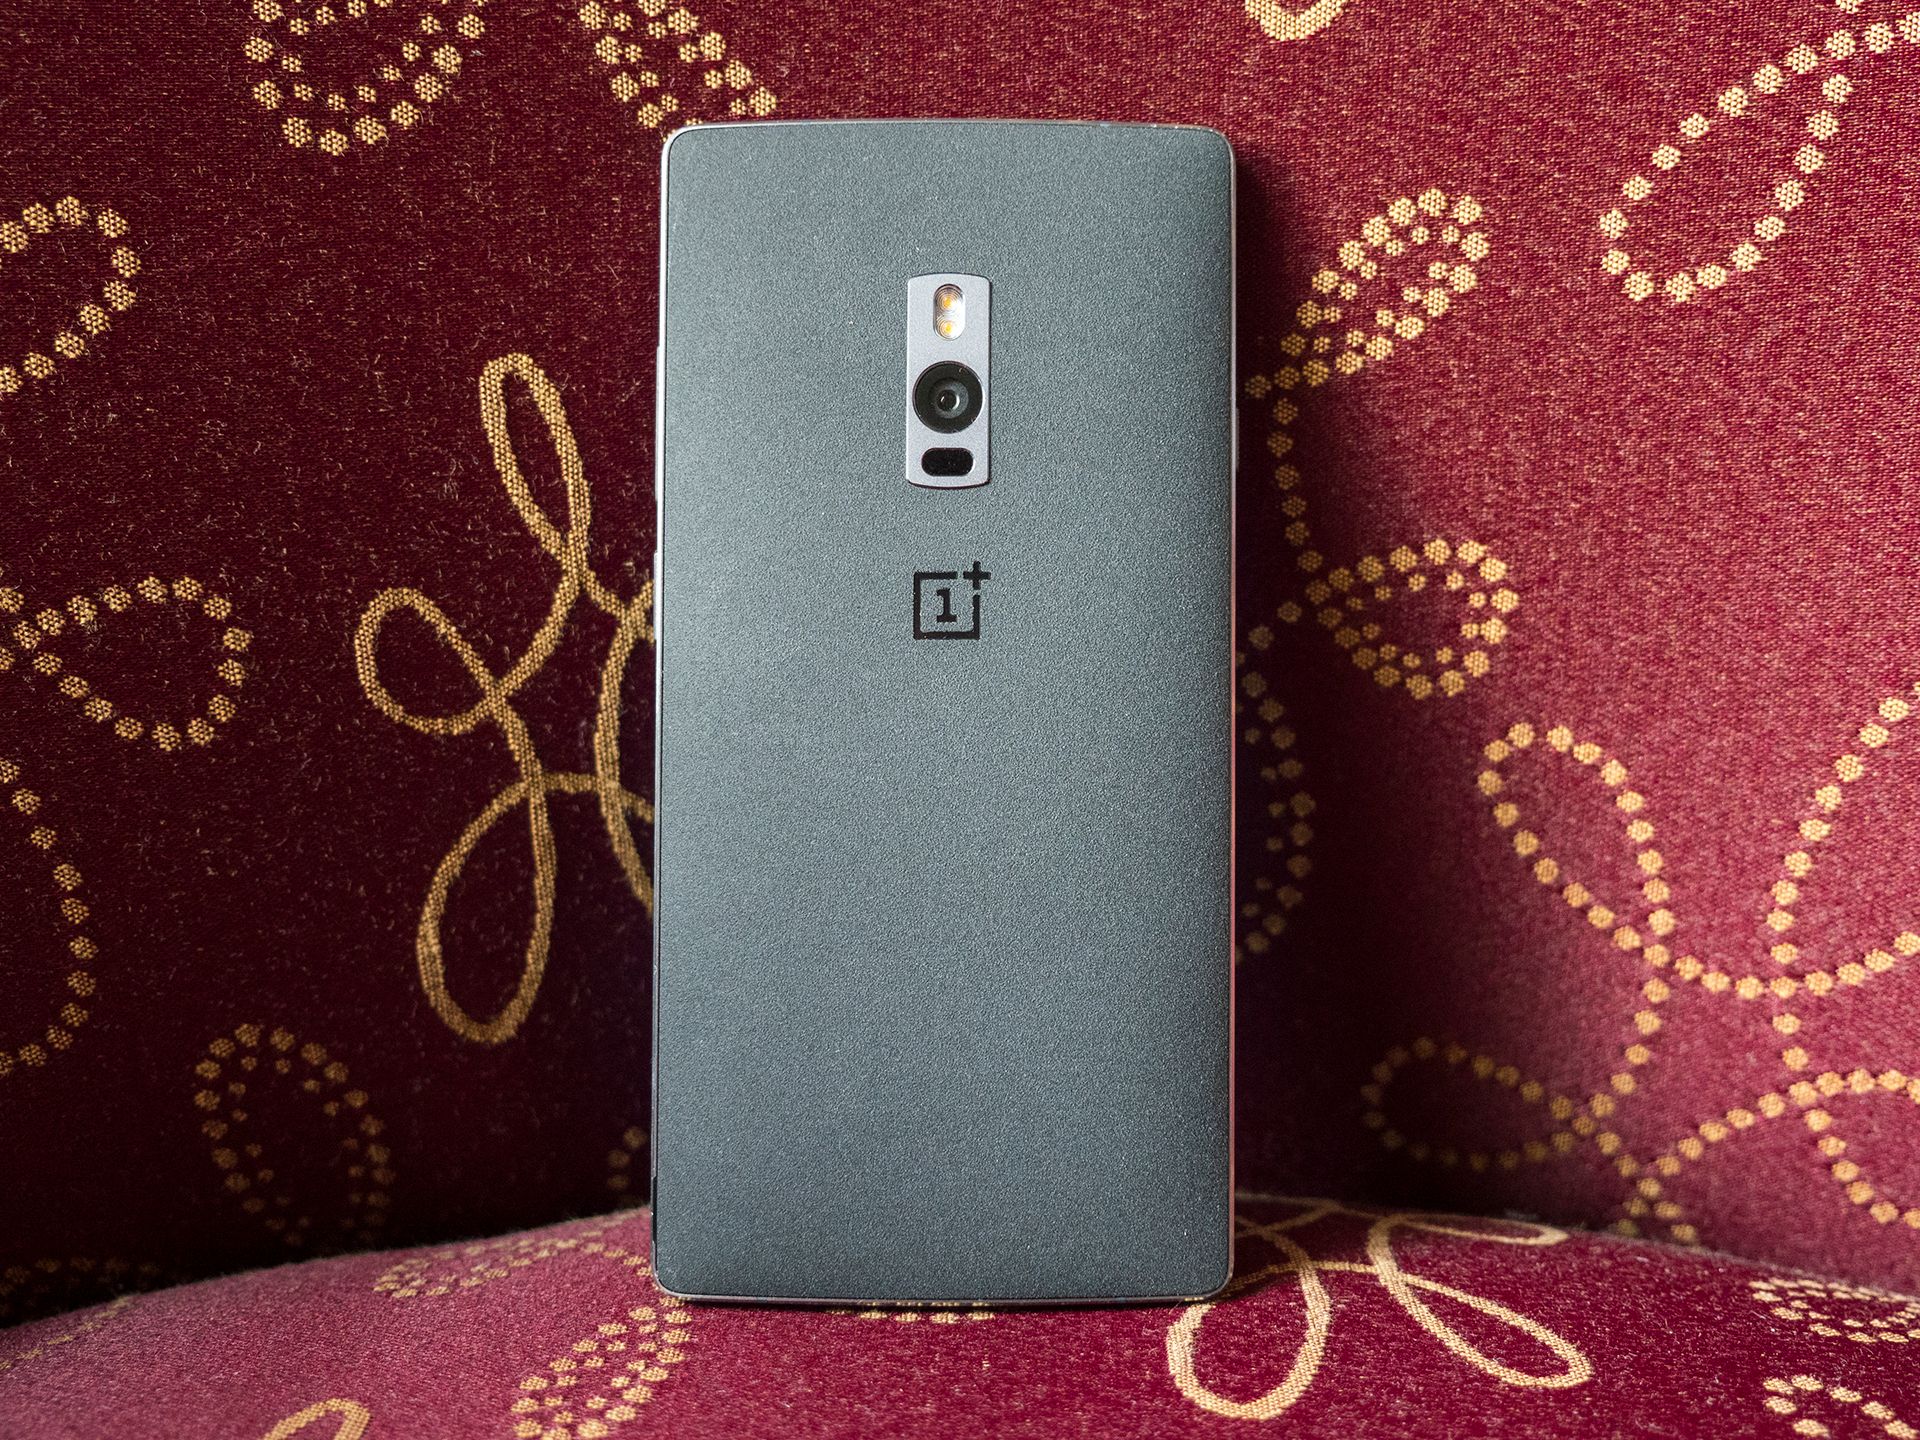 The OnePlus experiment photo 2